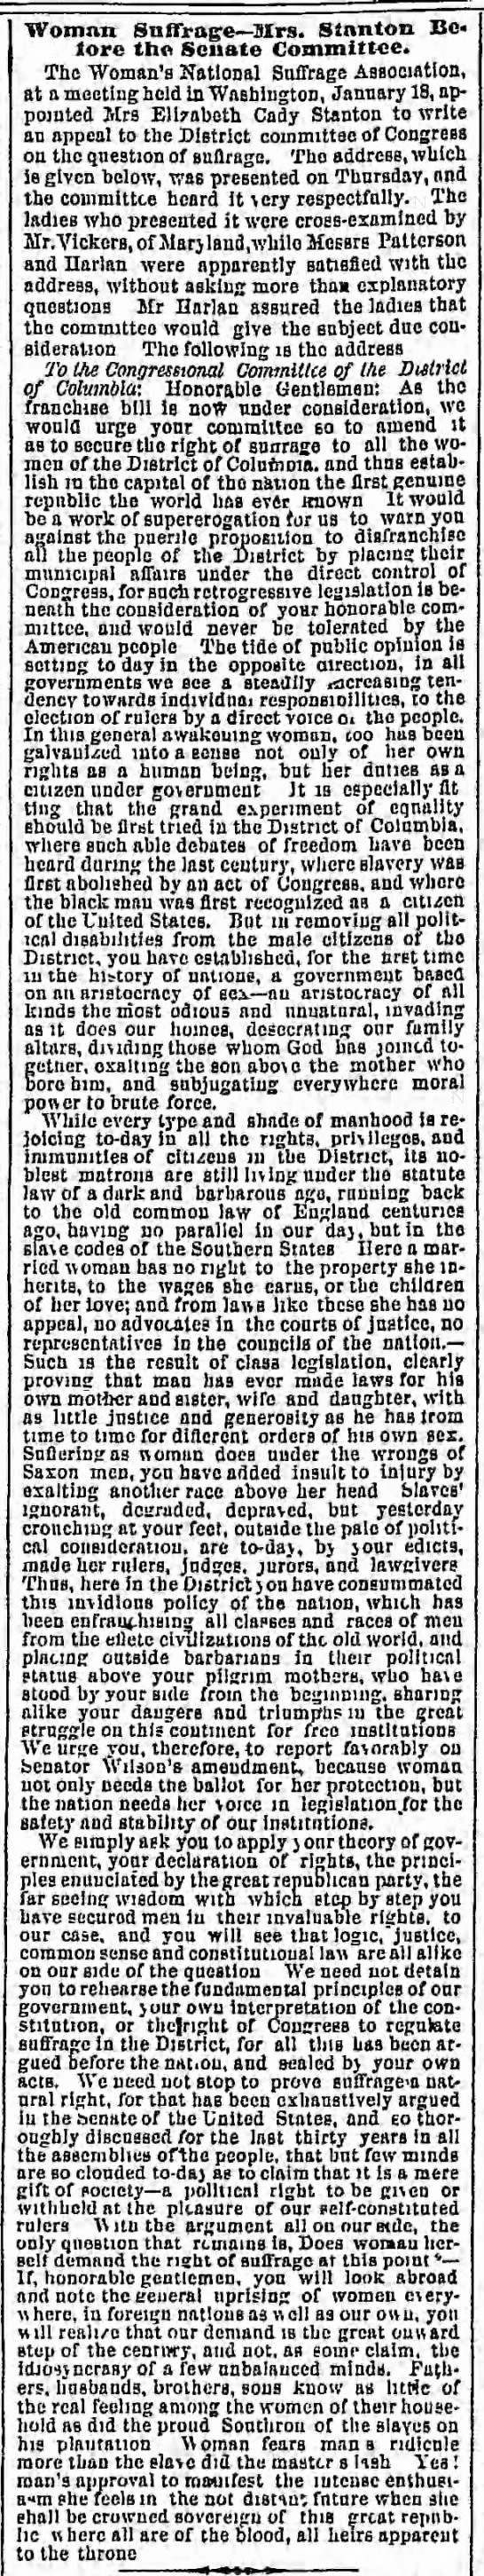 Elizabeth Cady Stanton addresses the Congressional Committee of the District of Columbia in 1869. - 